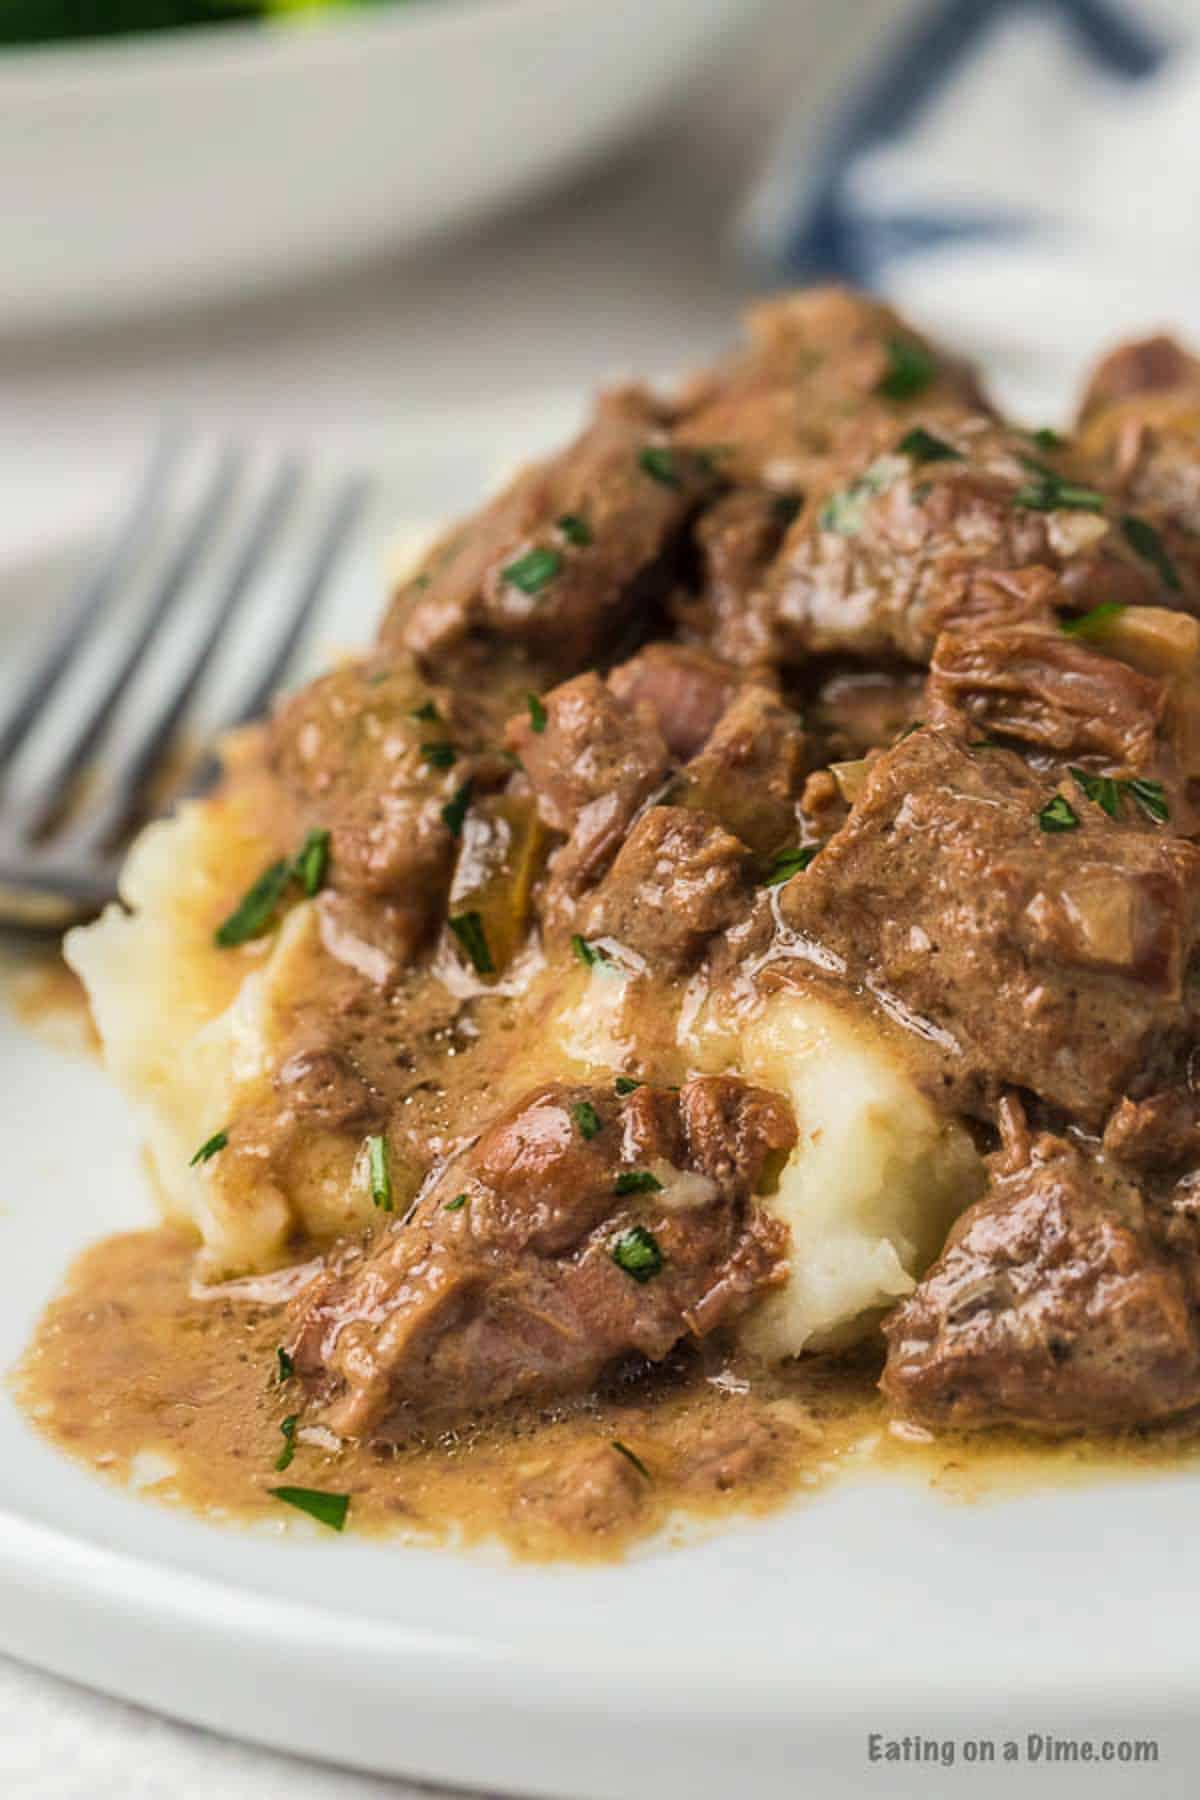 Beef Tips and gravy over mashed potatoes